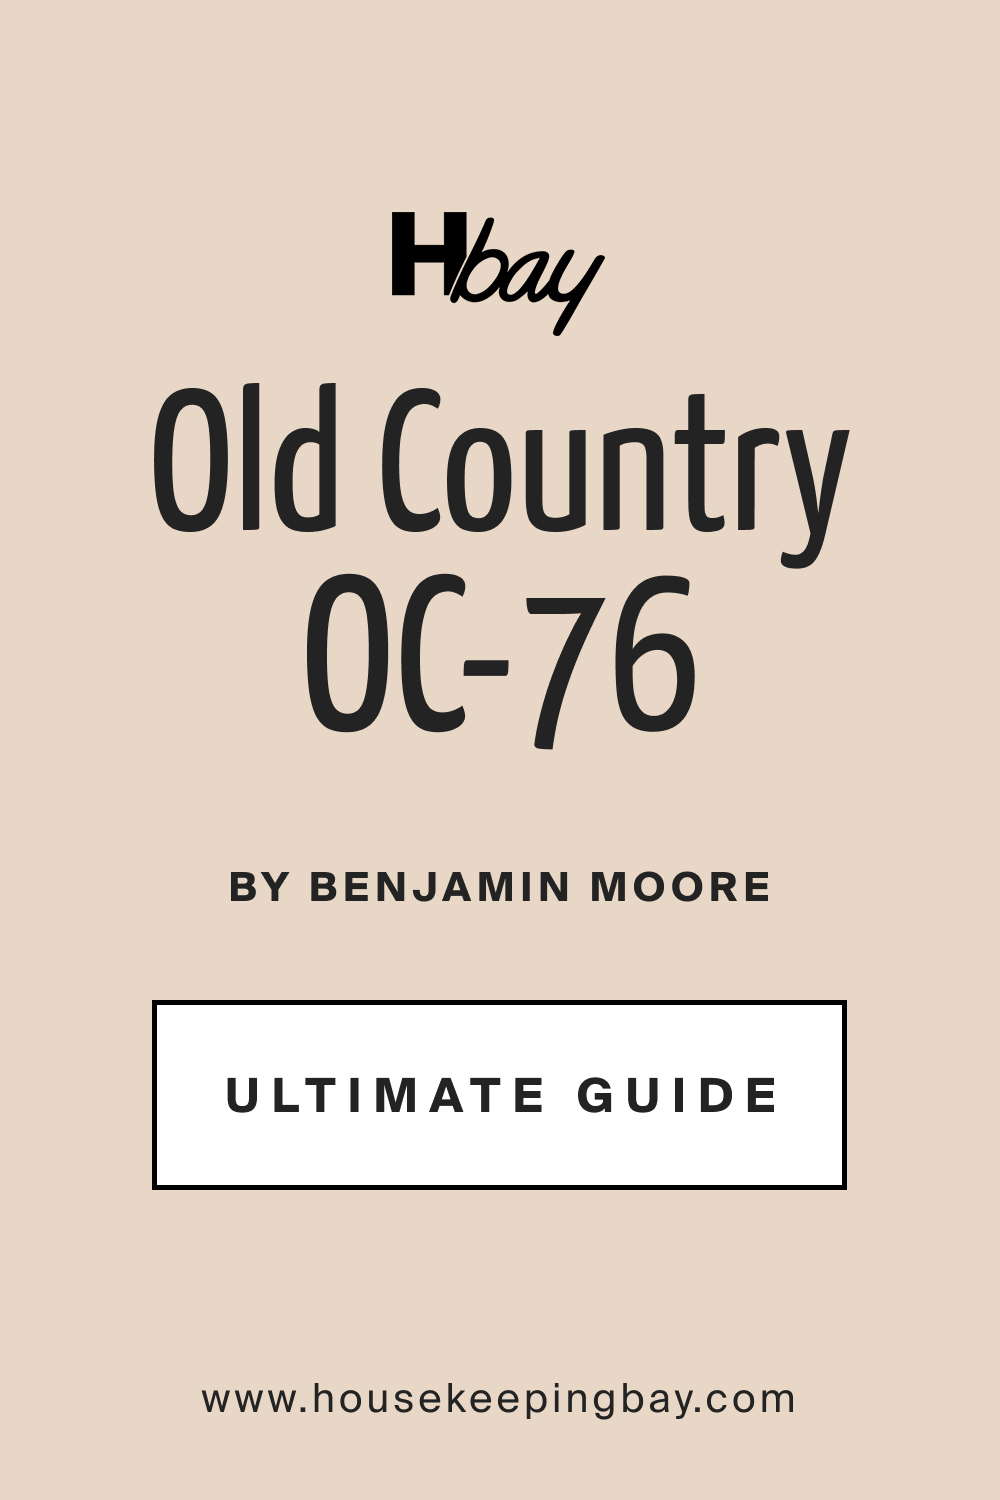 Old Country OC 76 by Benjamin Moore Ultimate Guide